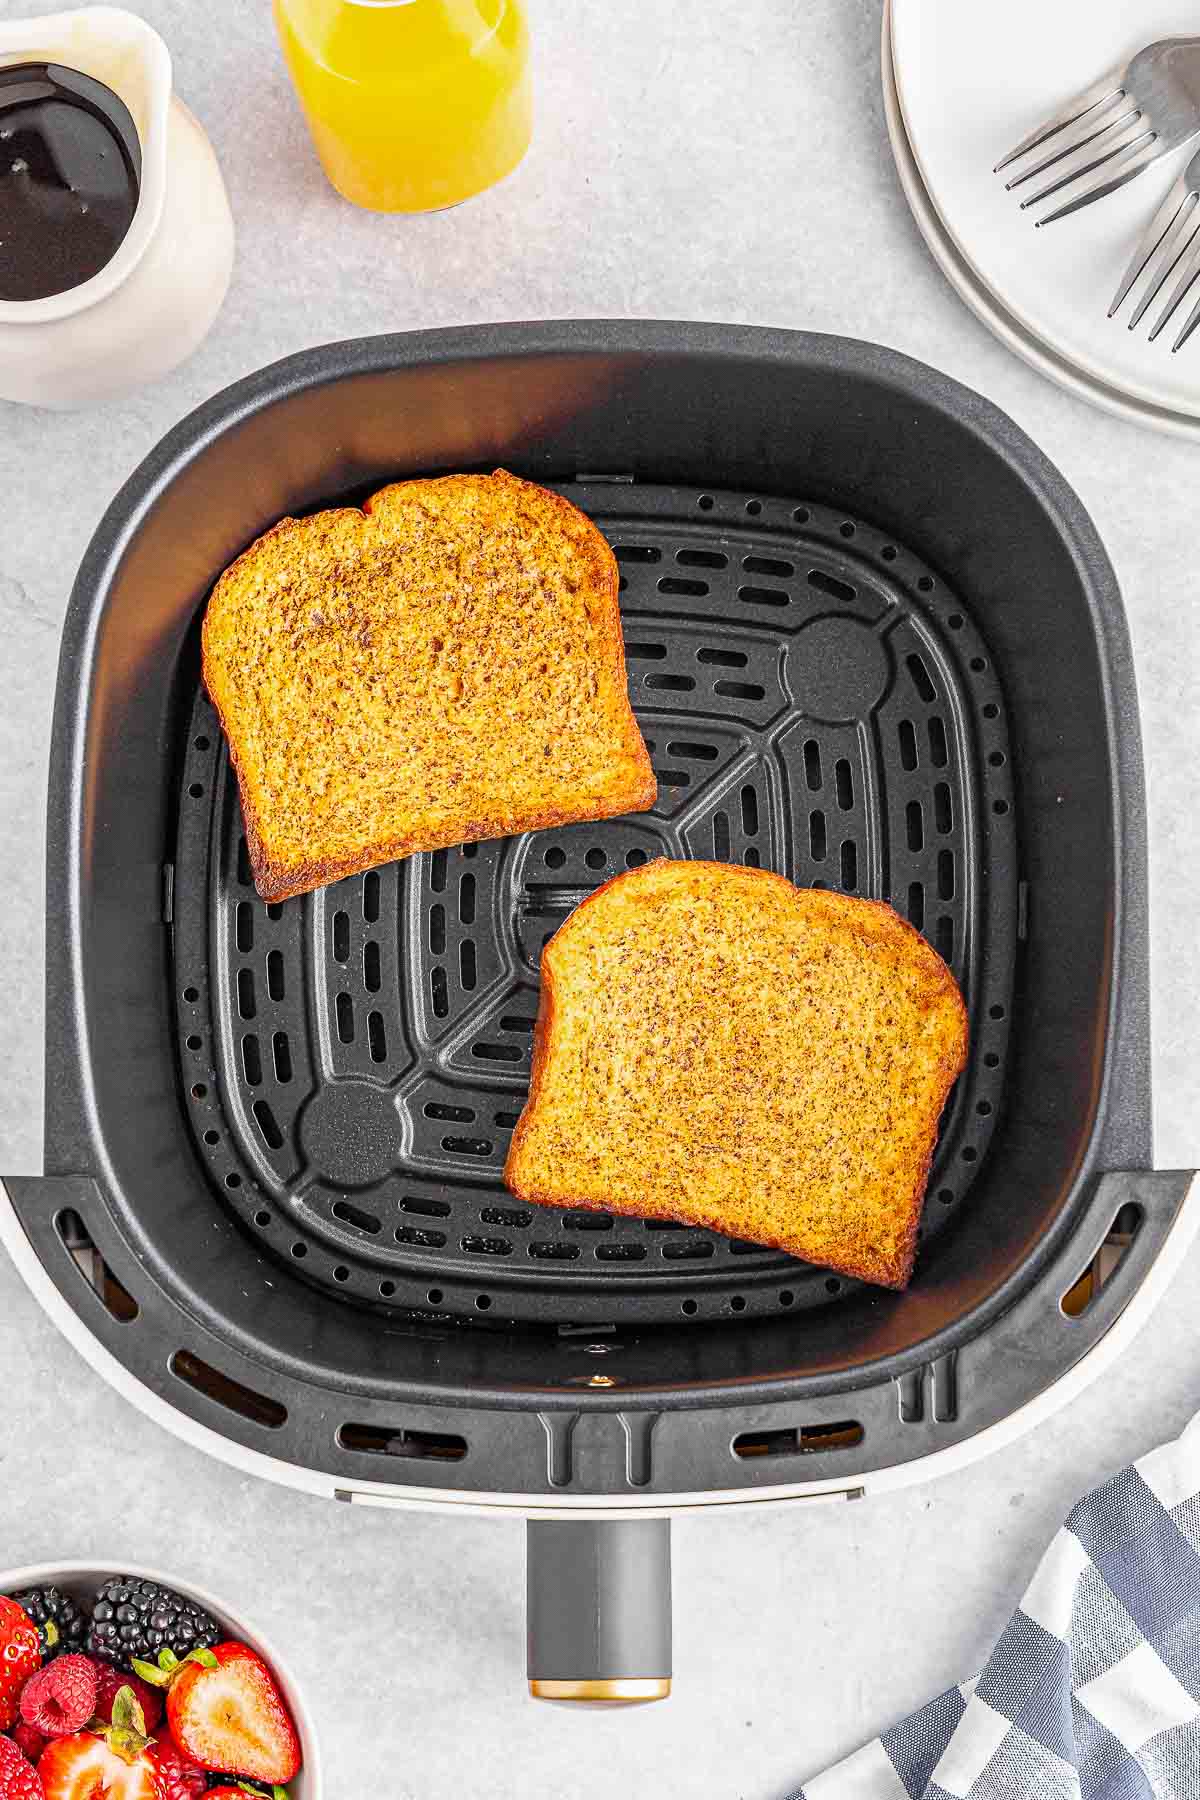 Two slices of coated french toast bread cooked in an air fryer.